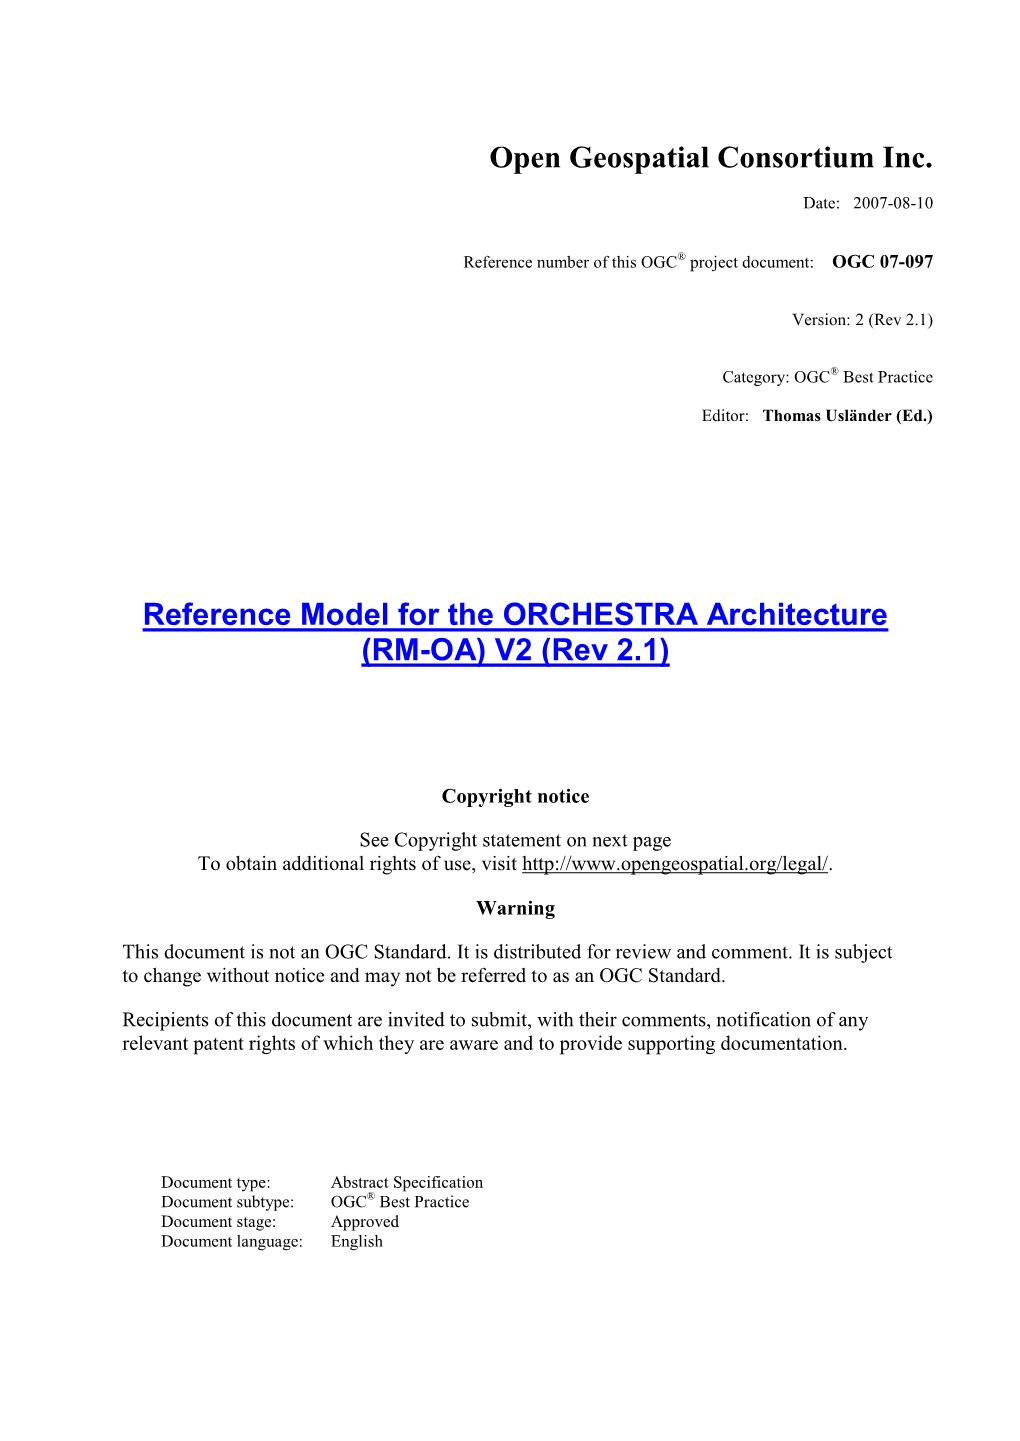 Reference Model for the ORCHESTRA Architecture (RM-OA) V2 (Rev 2.1)